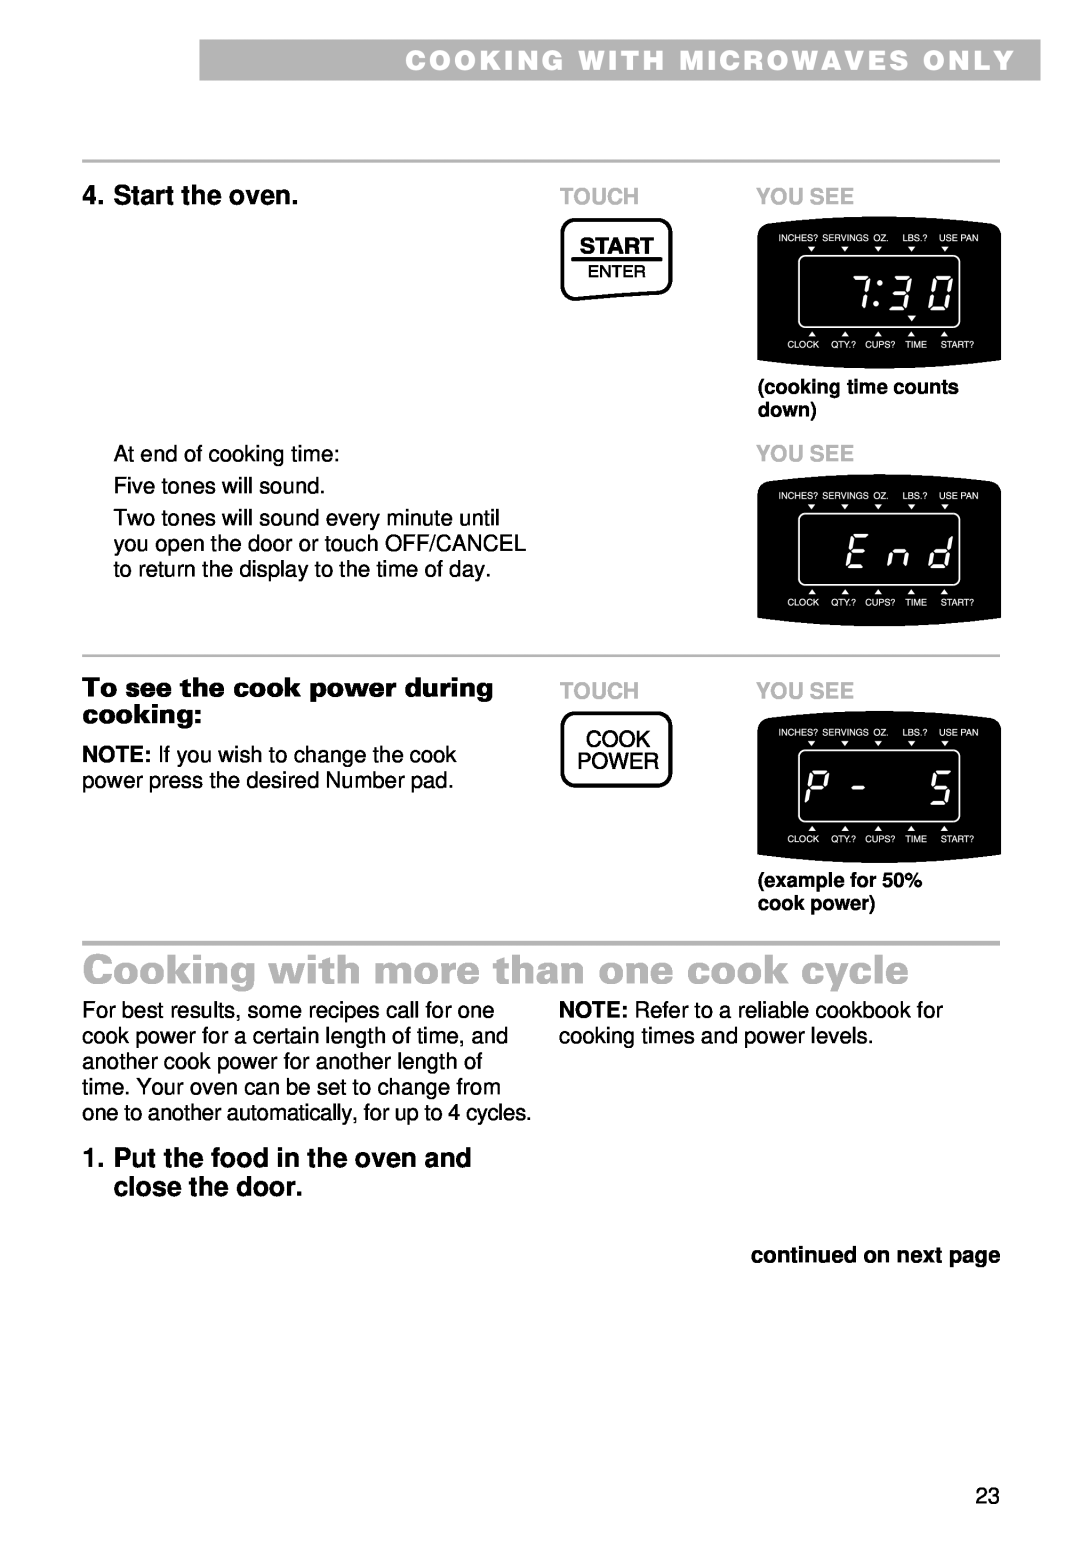 Whirlpool YMT9092SF, MT9102SF Cooking with more than one cook cycle, Start the oven, To see the cook power during cooking 